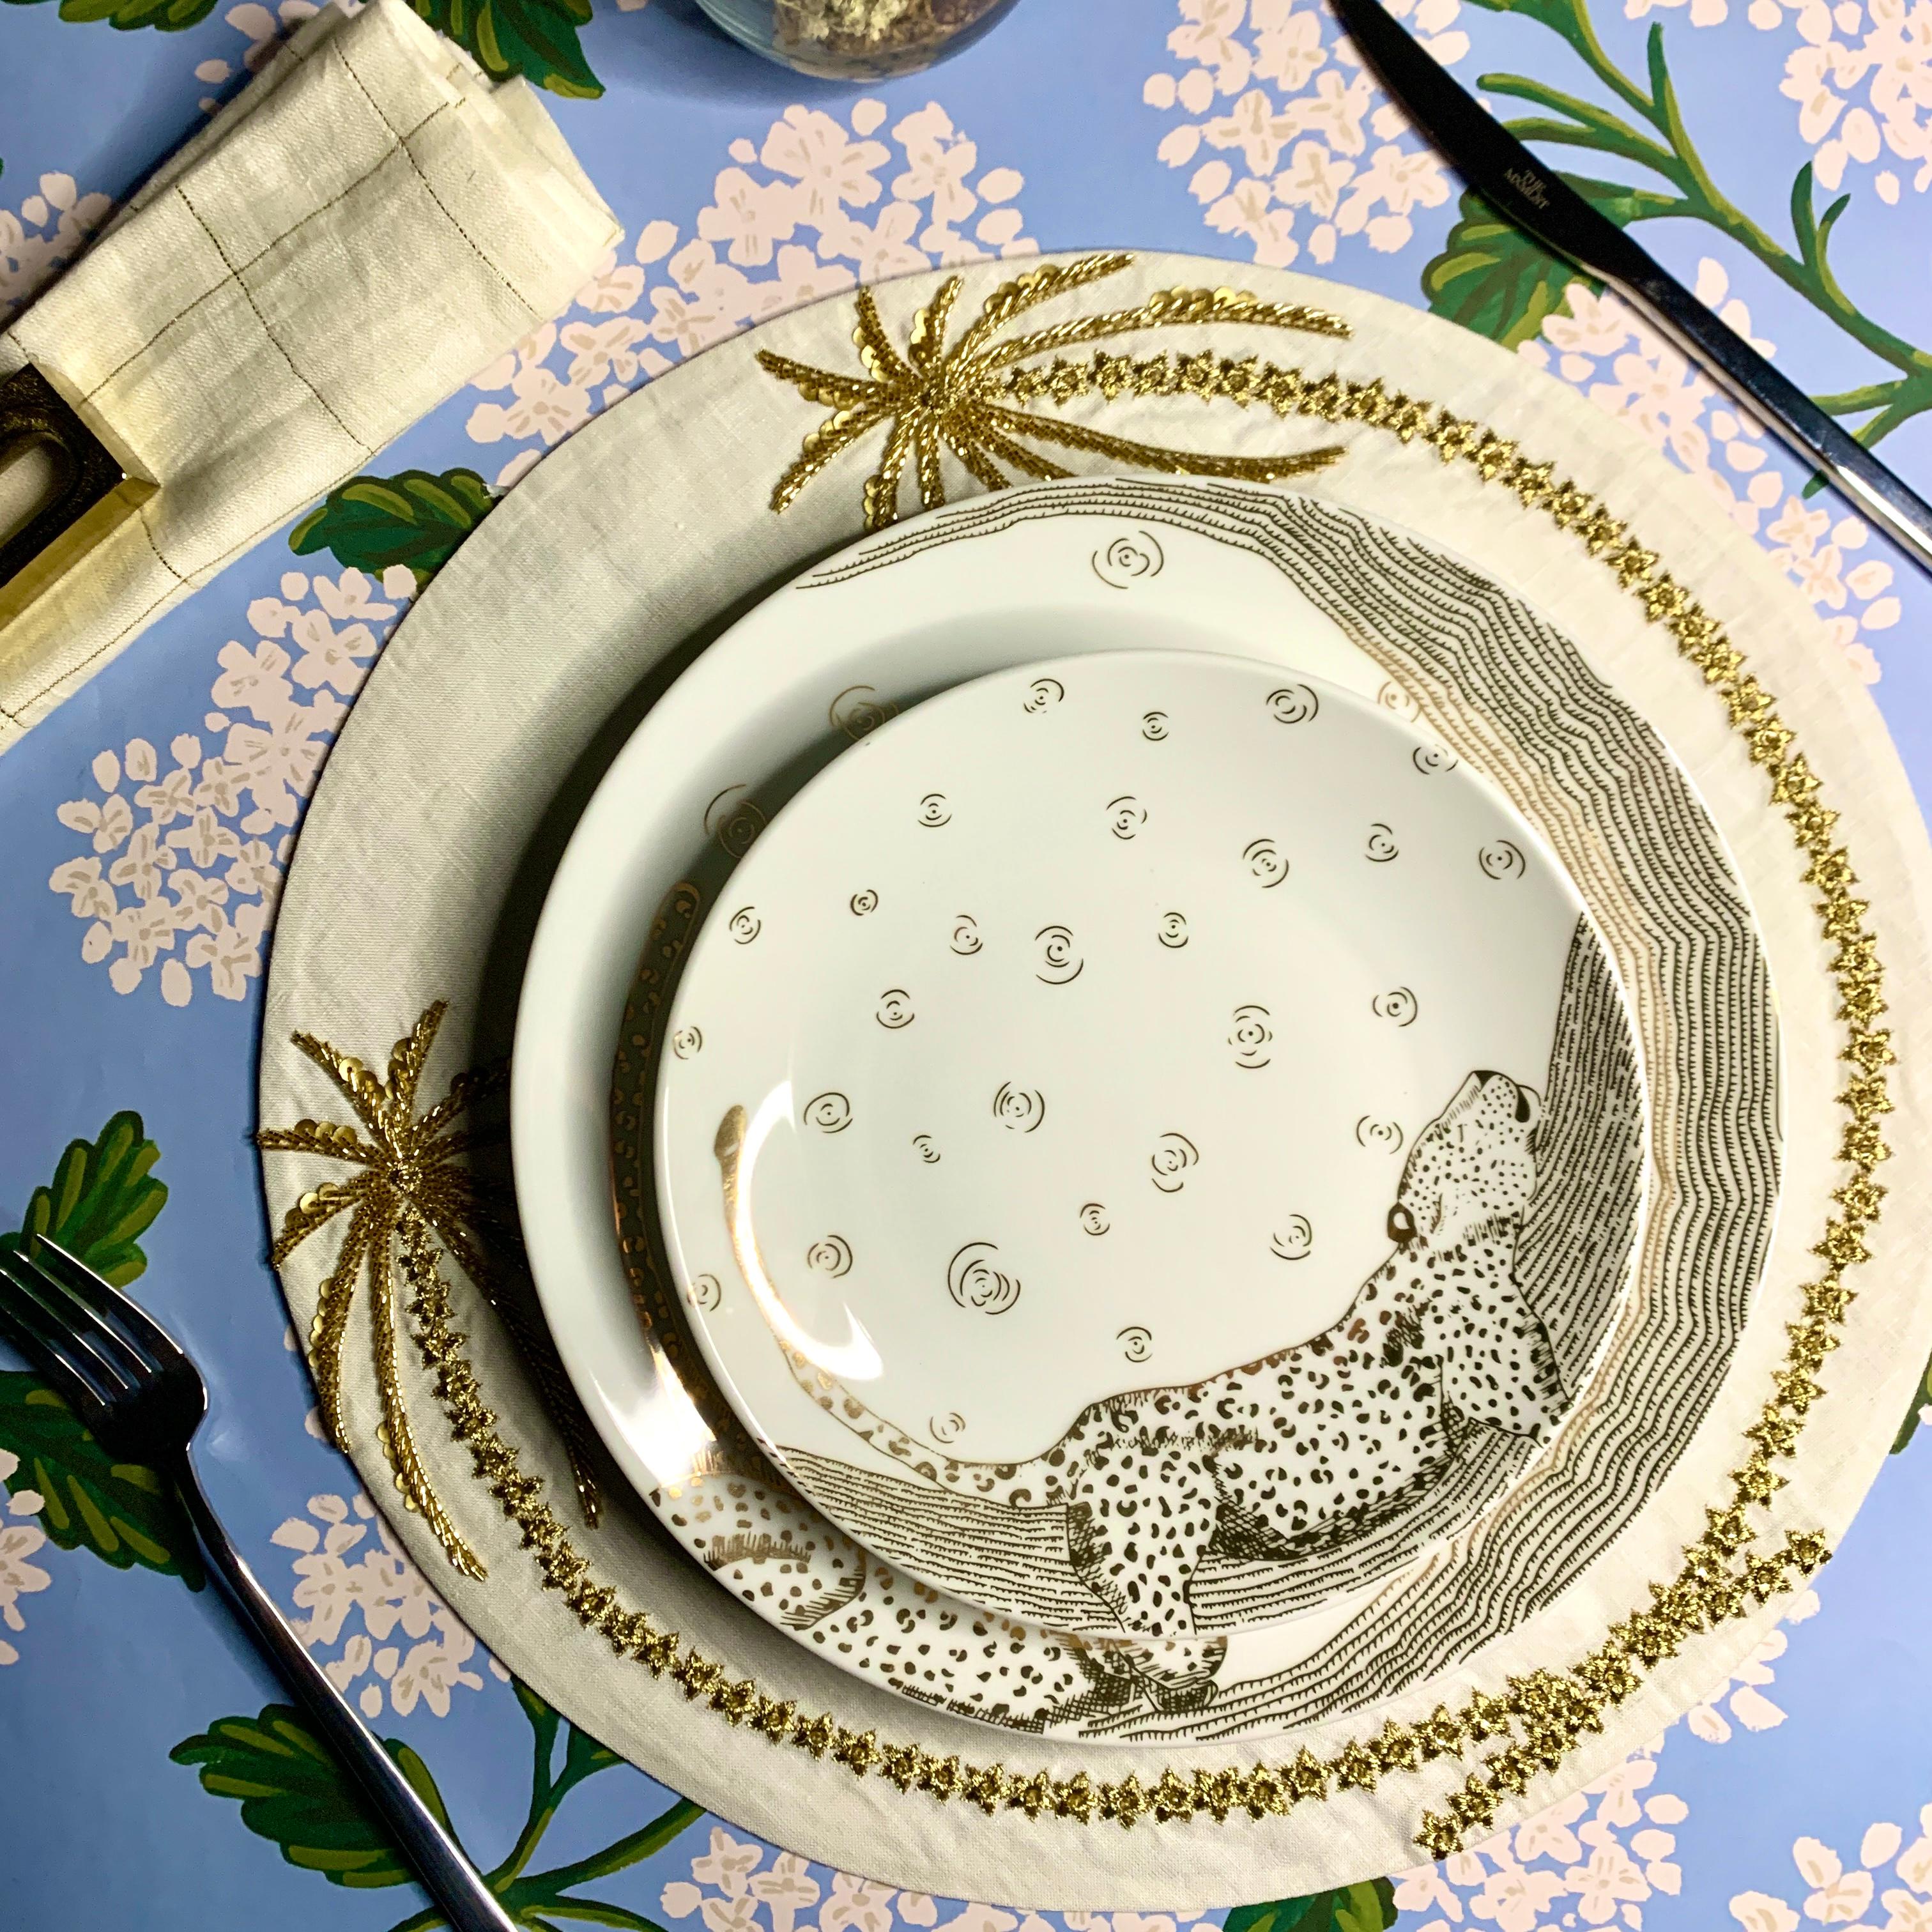 The Les Navas dinner set features a hand-painted guilded leopard in 12k Gold under the night sky. The activities of this great animal are showcased in the motif of this set. Playful, chic and dynamic- this dinner set will shine on your dinner table.